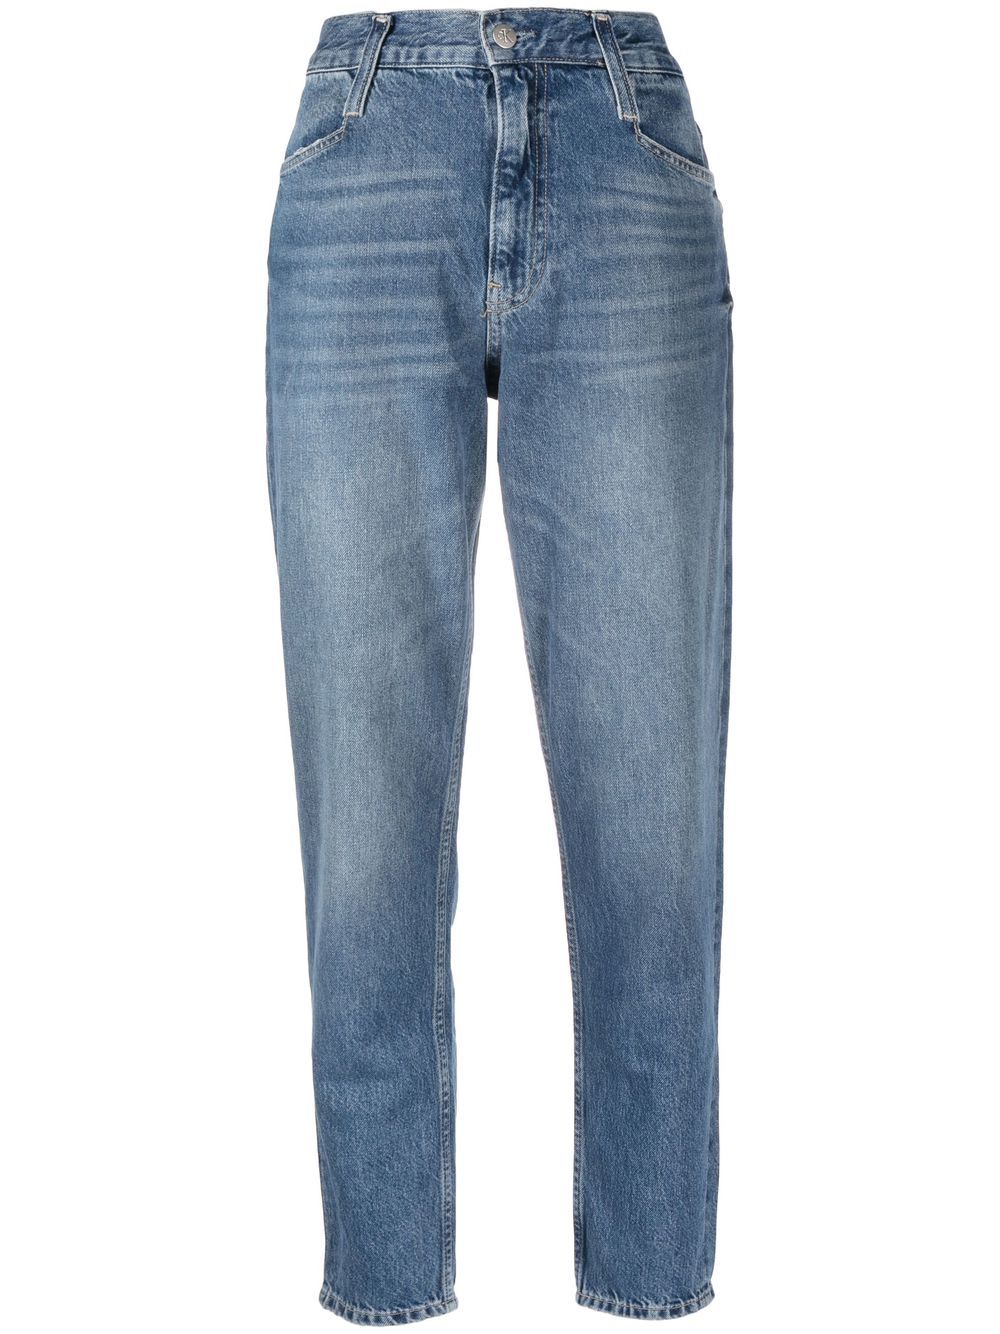 CALVIN KLEIN JEANS EST.1978 MOM TAPERED JEANS